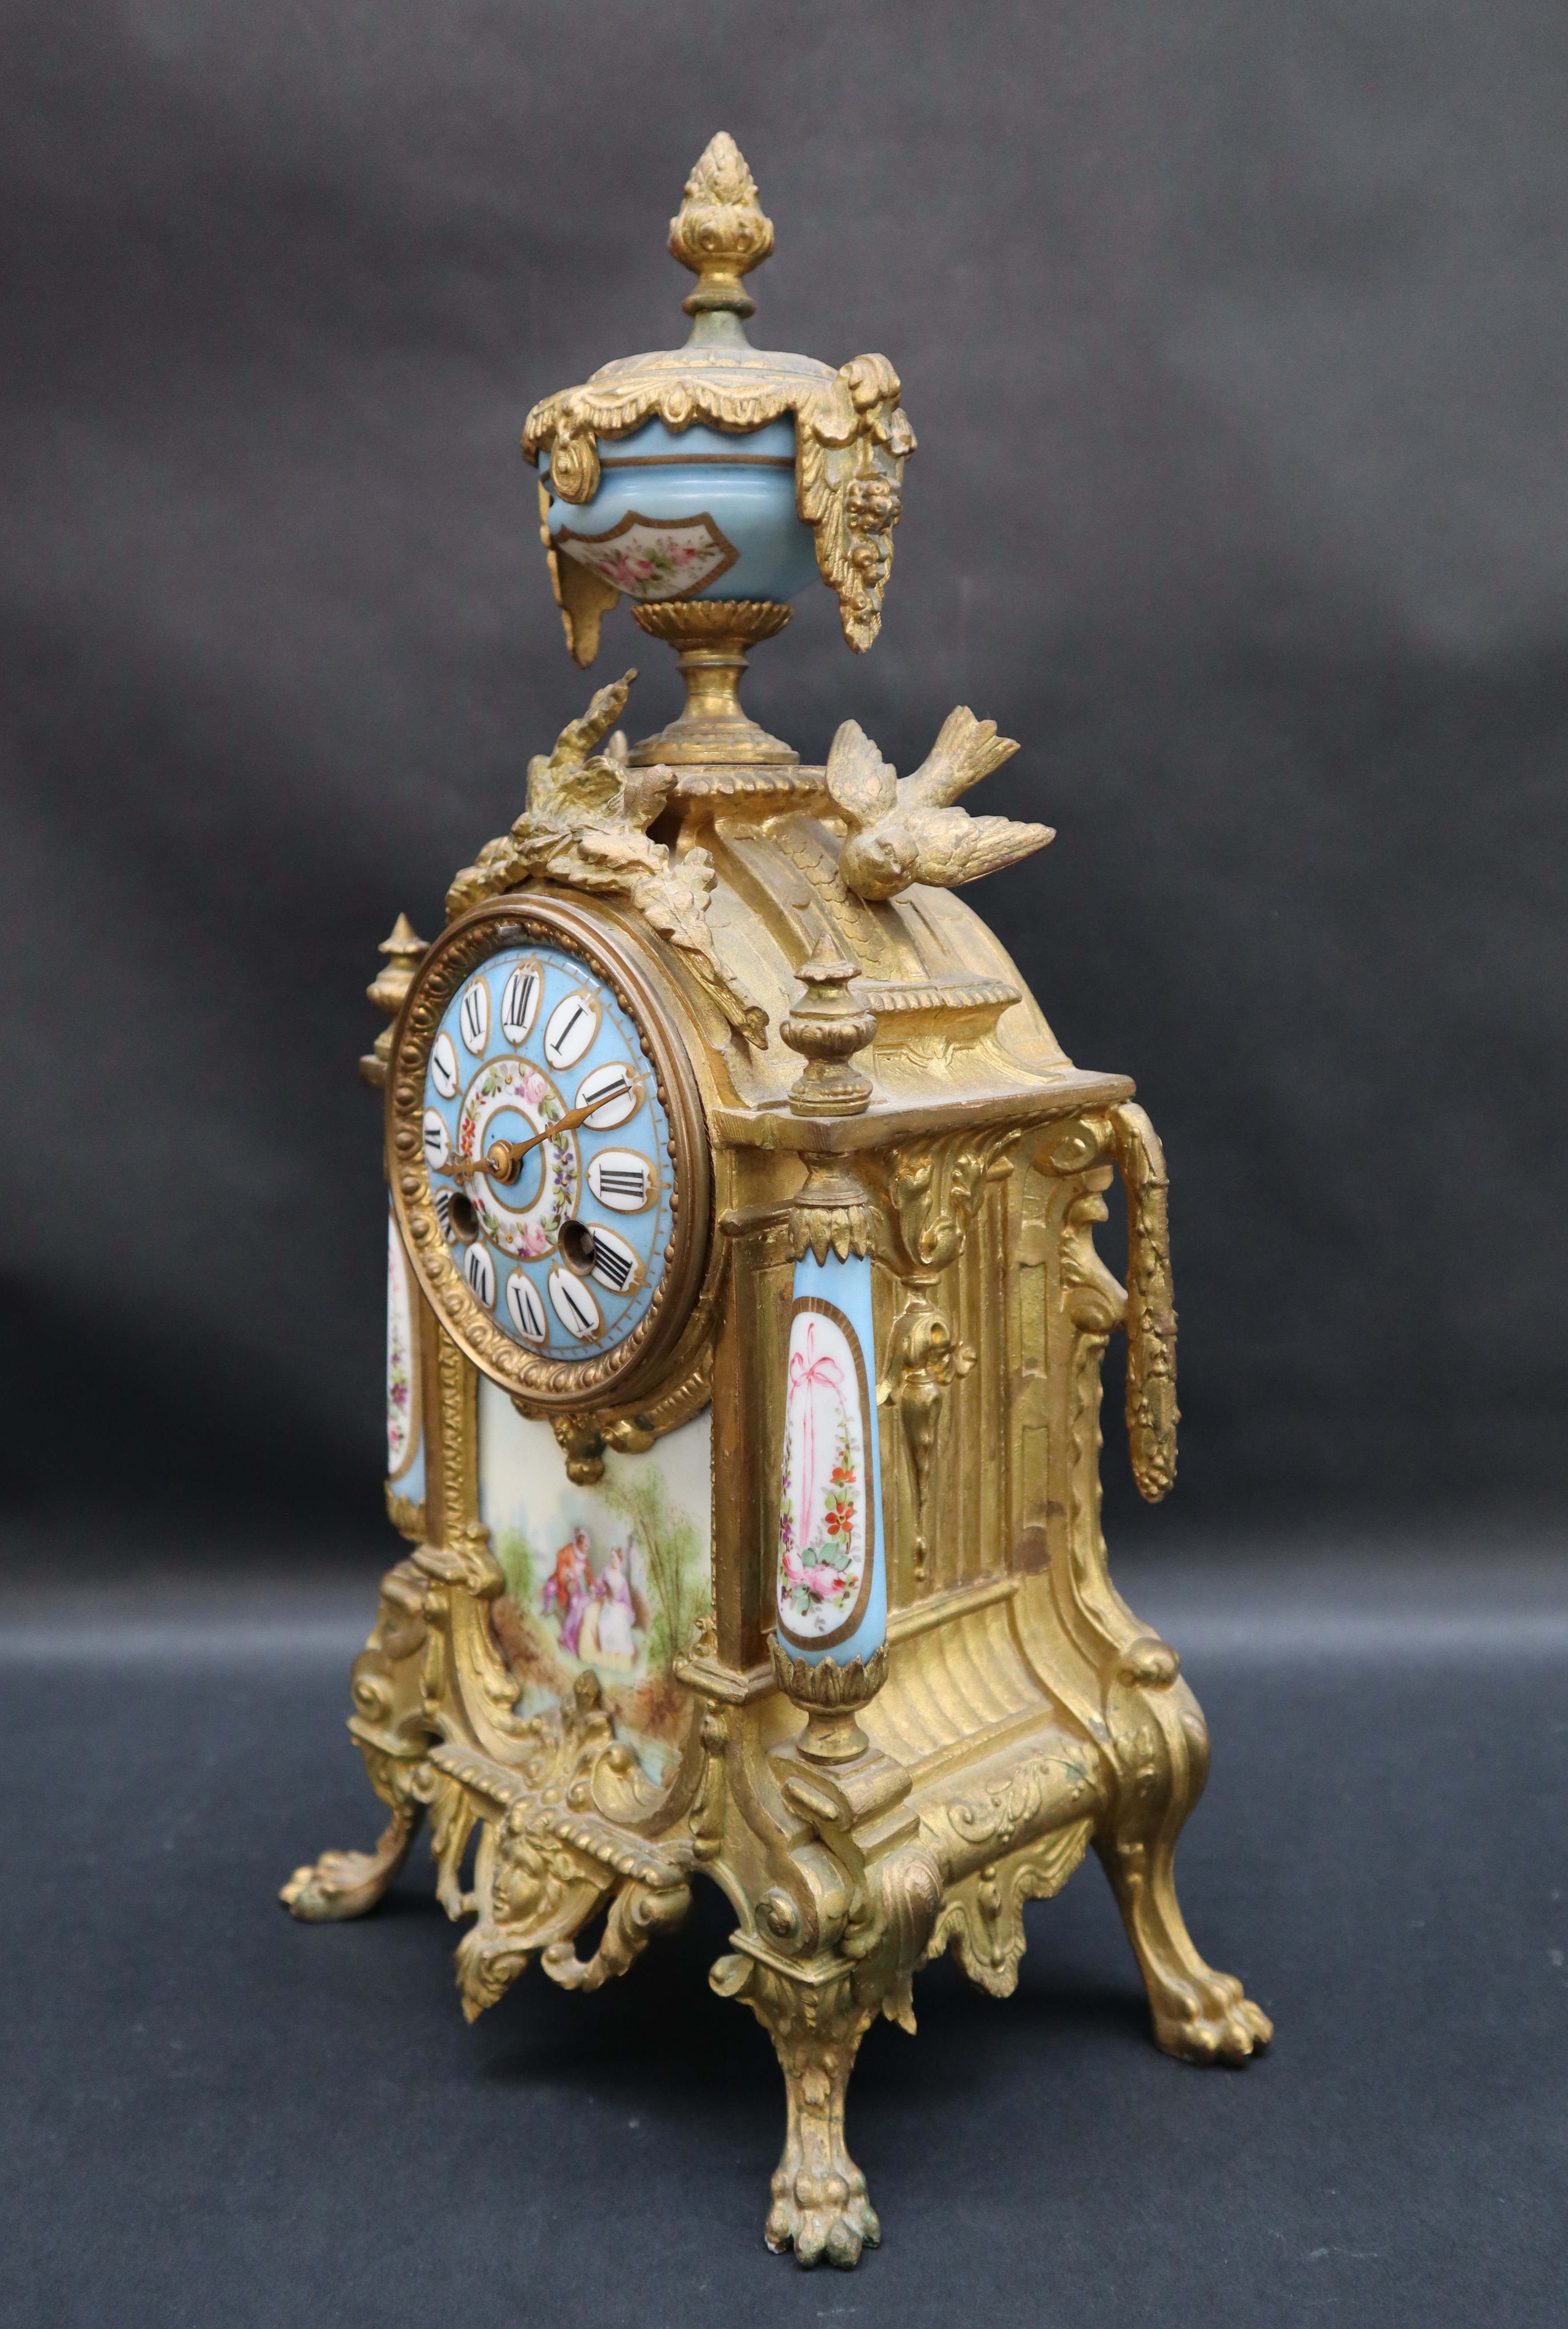 A 19th century French ormolu clock with a porcelain urn surmount, - Image 2 of 5